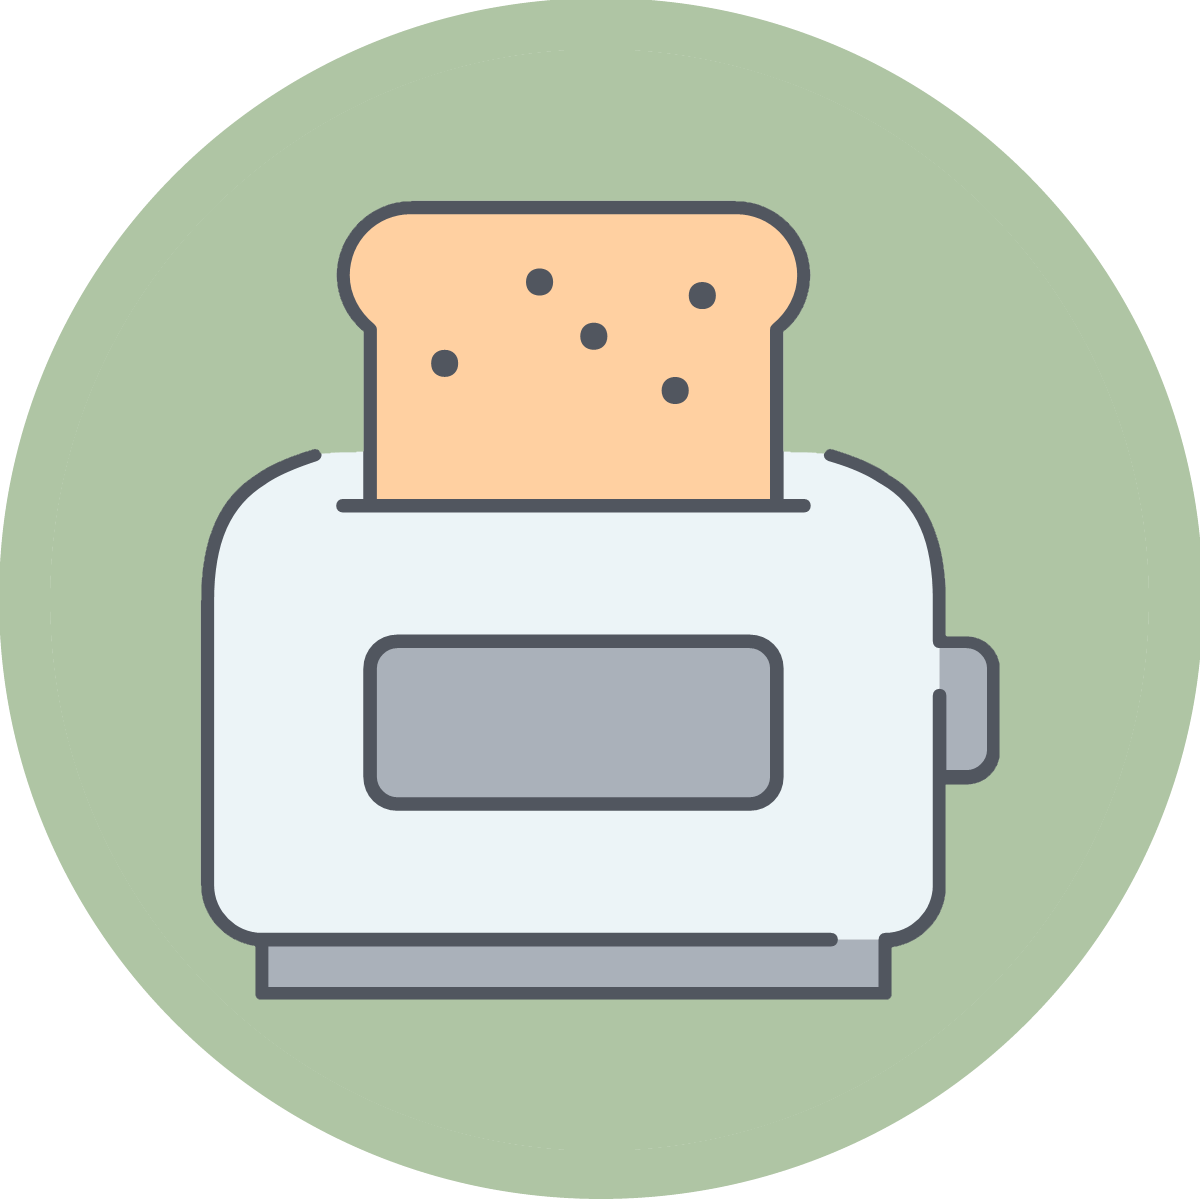 Beginner Friendly Recipes Category - A picture of a toaster